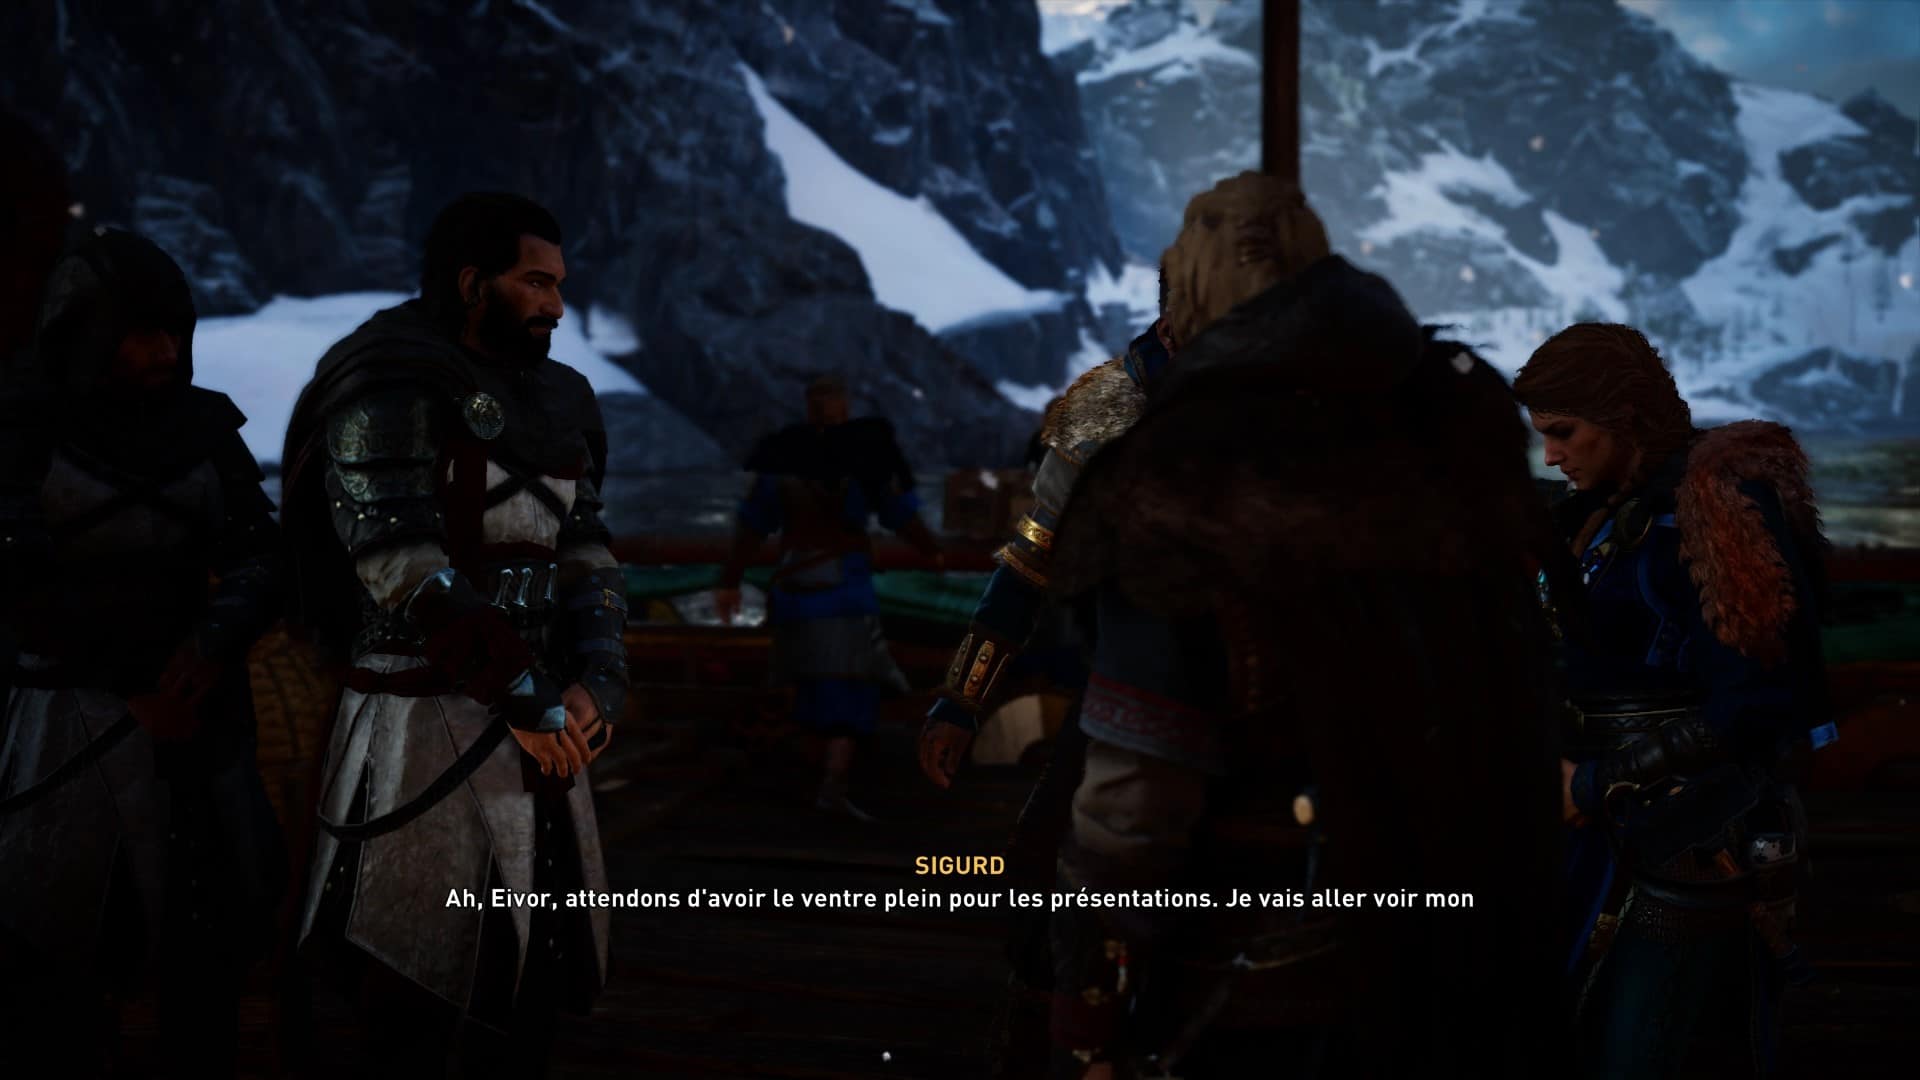 Le prince prodigue Assassin's Creed Valhalla